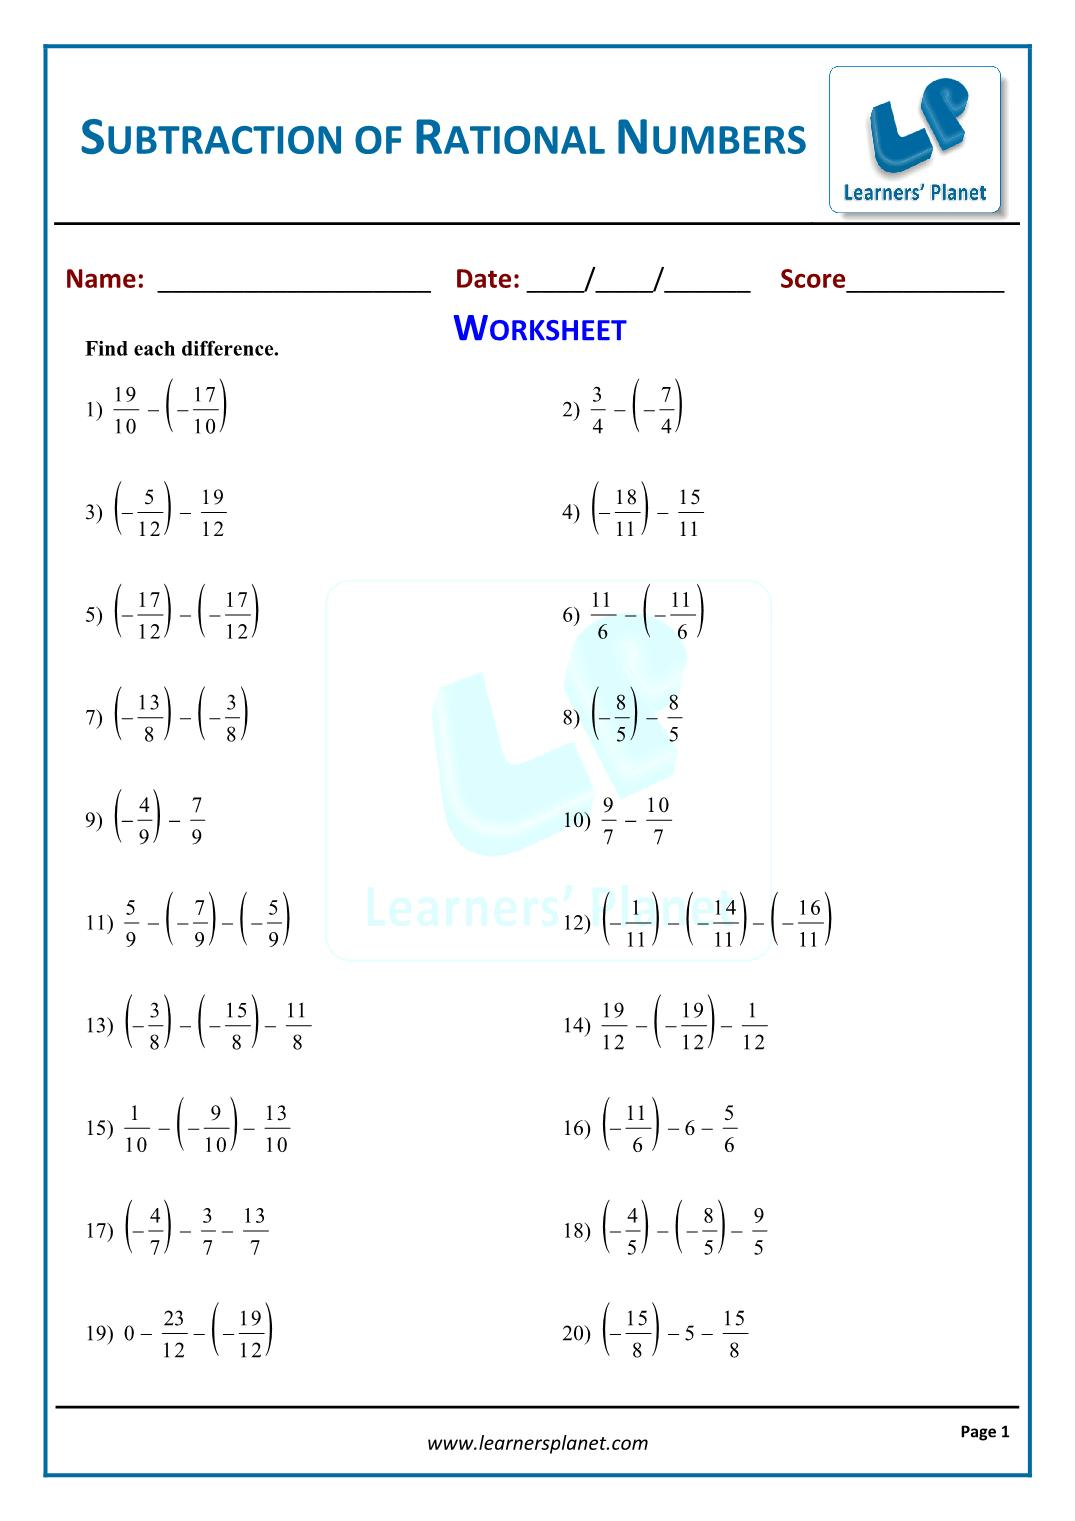 classifying rational numbers practice and problem solving c answer key